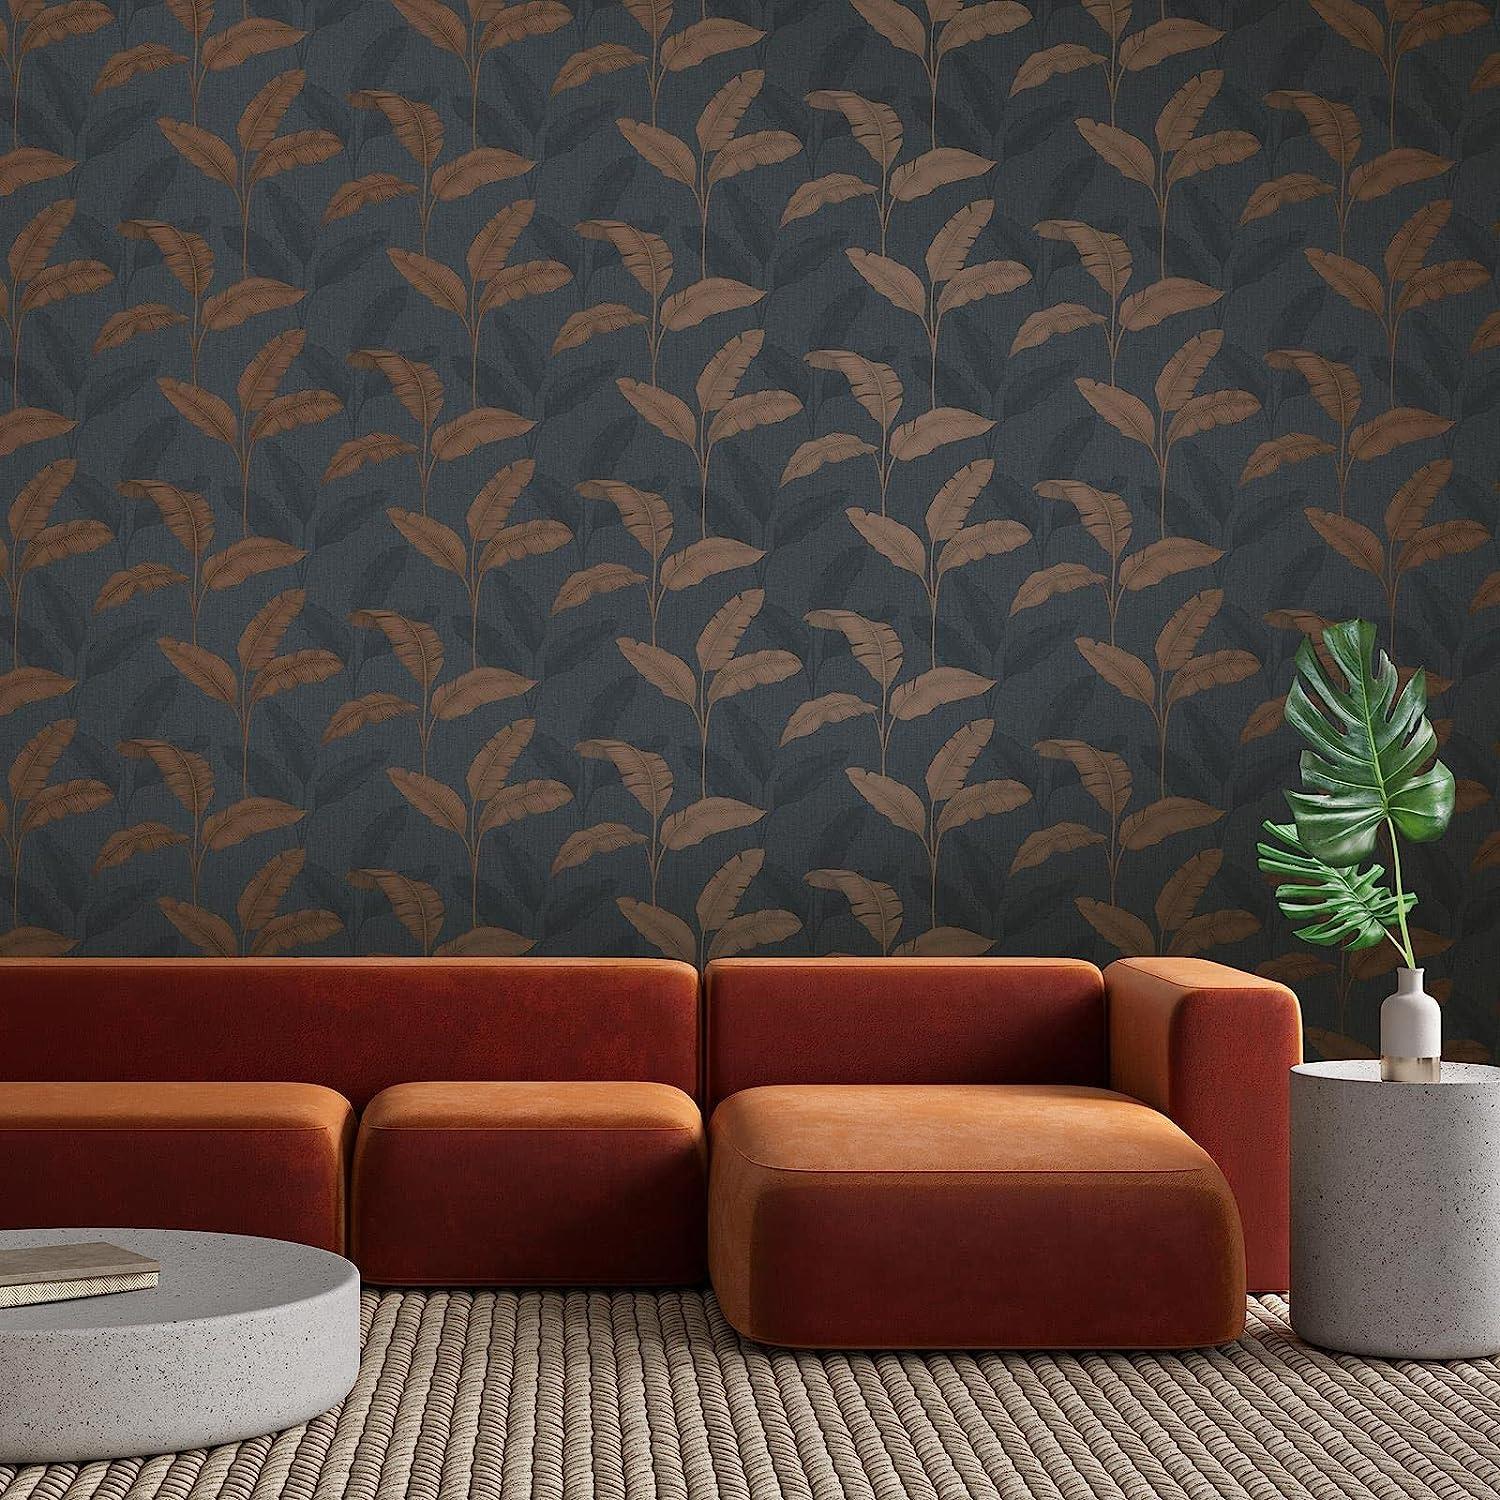 RASCH (U.K) Limited Amara Palm Wallpaper - Modern Wallpaper for Living Room, Bedroom, Fireplace - Decorative Luxury Tropical Wall Paper with Rusty Tone (Navy/Brown)